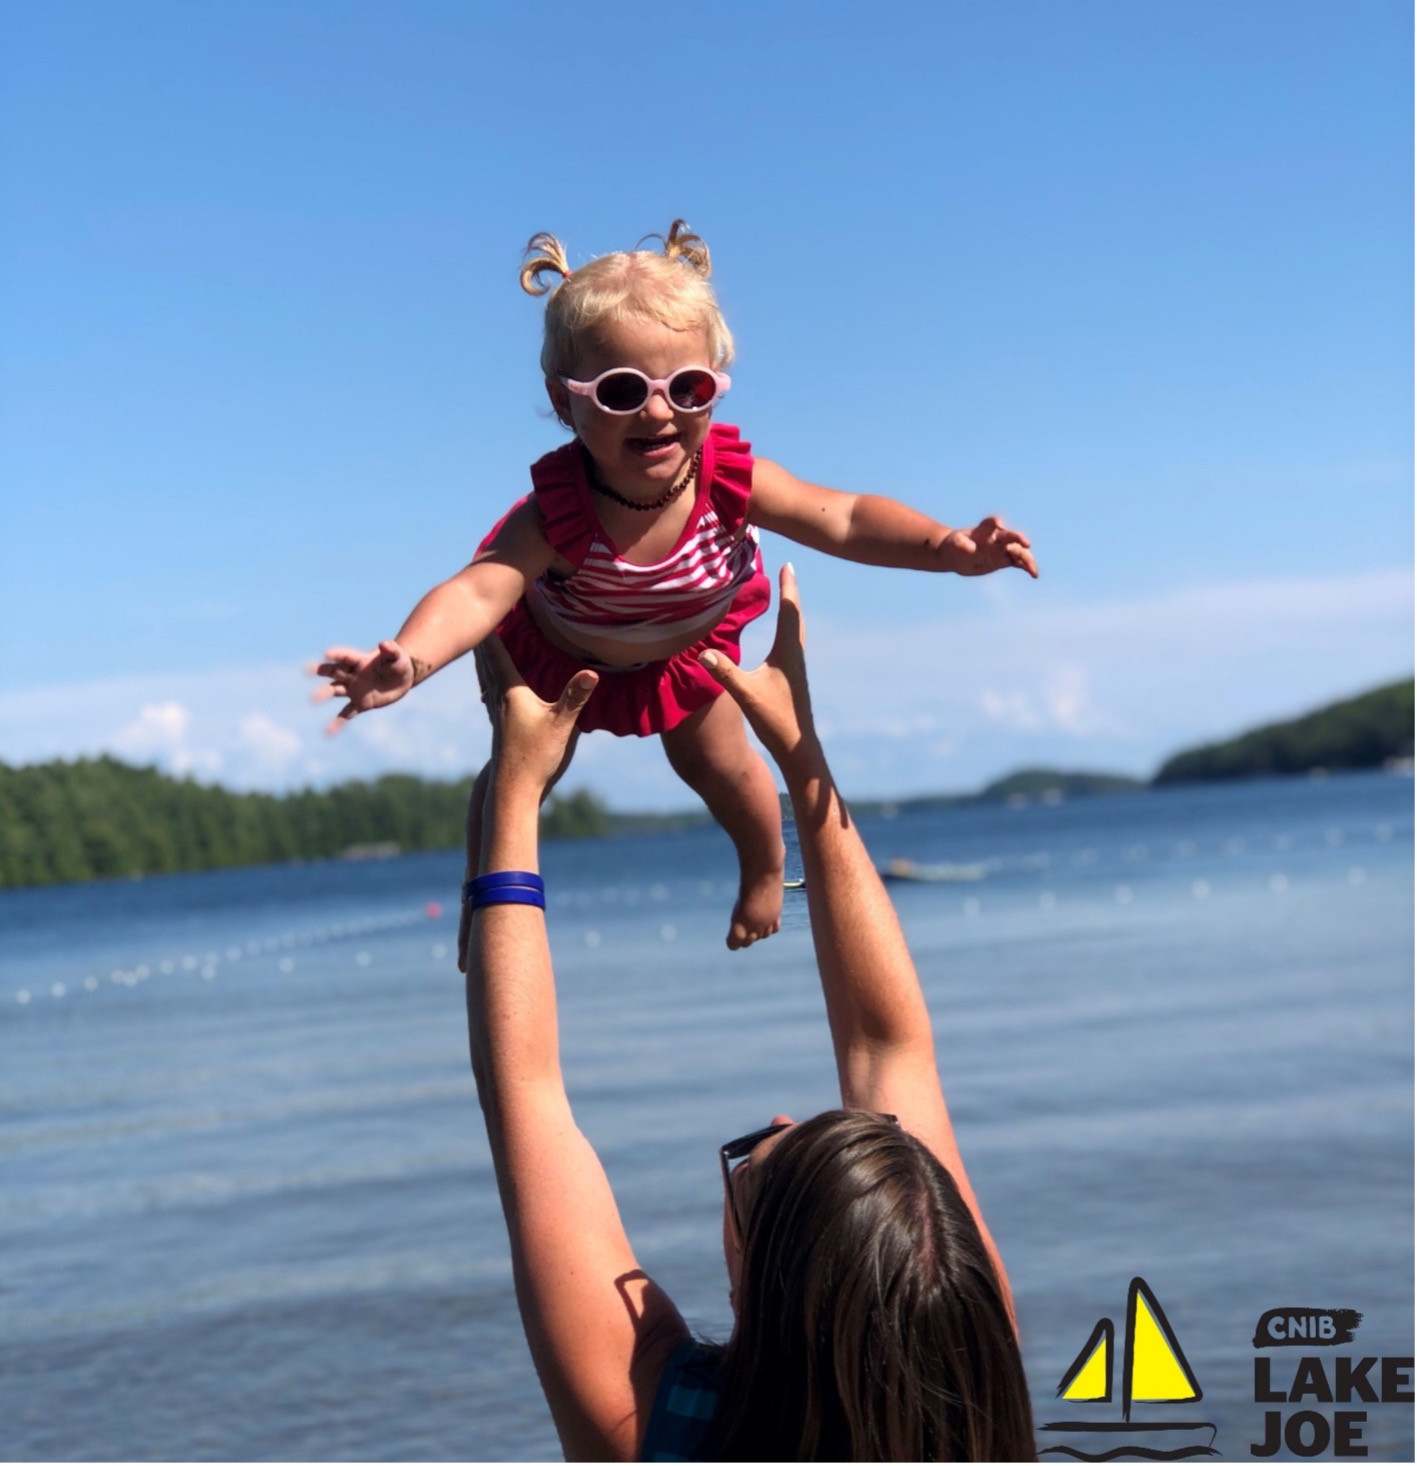 A little girl wearing a bathing suit and sunglasses is being thrown in the air by her mom on the shore at CNIB Lake Joe. CNIB Lake Joe yellow and black sailboat logo at the bottom-right corner of the image.